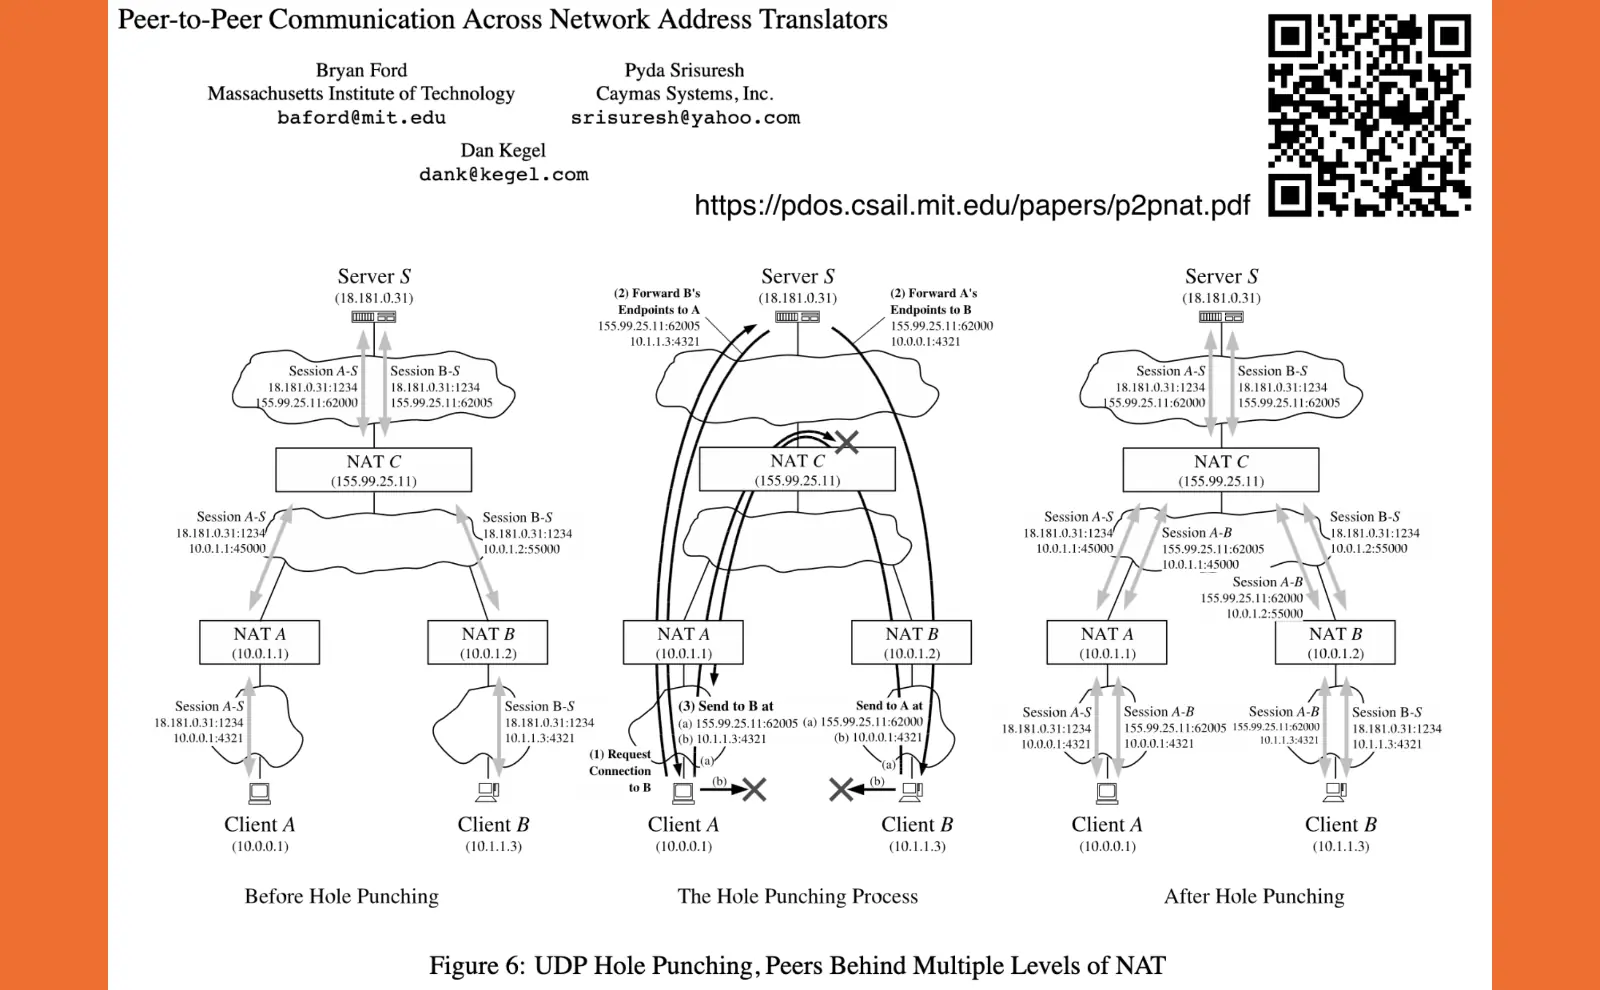 Complicated diagram describing establishing peer-to-peer connections across network address translation on private networks